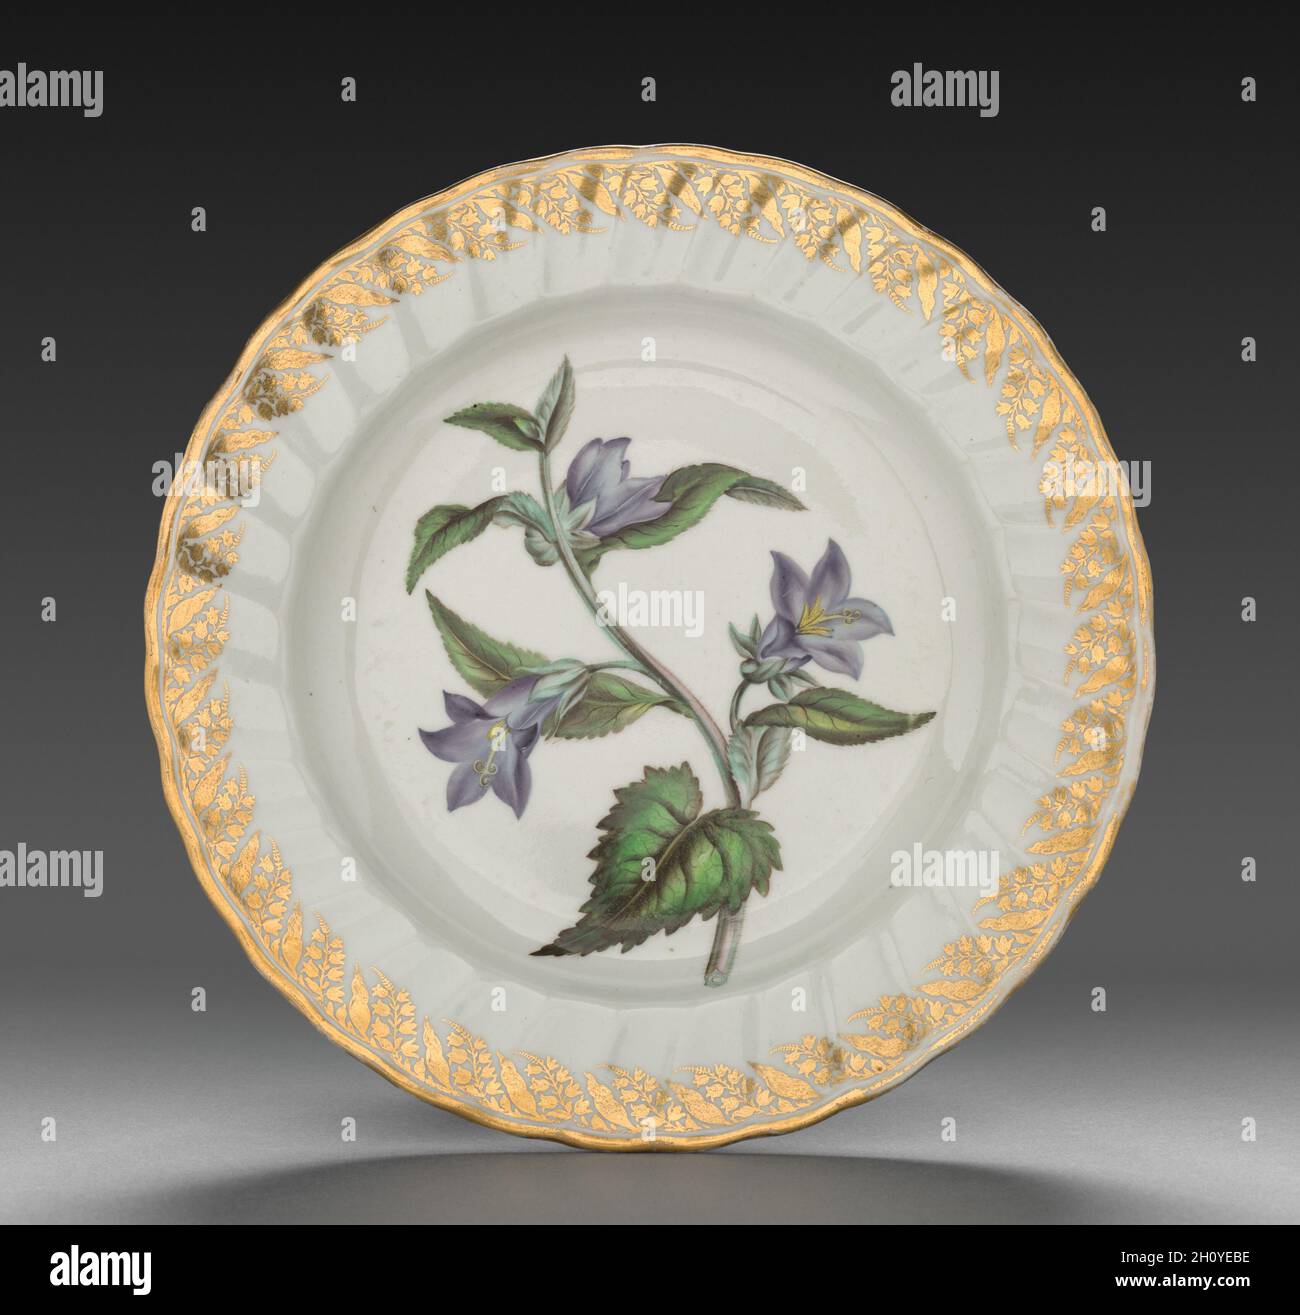 Plate from Dessert Service: Nettle Leaved Bell Flower, c. 1800. Derby (Crown Derby Period) (British). Porcelain; diameter: 23.4 cm (9 3/16 in.); overall: 3.1 cm (1 1/4 in.).  Each dish is decorated with recognizable plants, the names of which are inscribed on the base in both Latin and English. Identifying the blossoms only became customary in the late 18th century when a single piece of porcelain was decorated with one species, and flowers were represented along with leaves, stems, seed pods, and roots. All of this reflects Carolus Linnaeus’s recent invention of a scientific method to categor Stock Photo